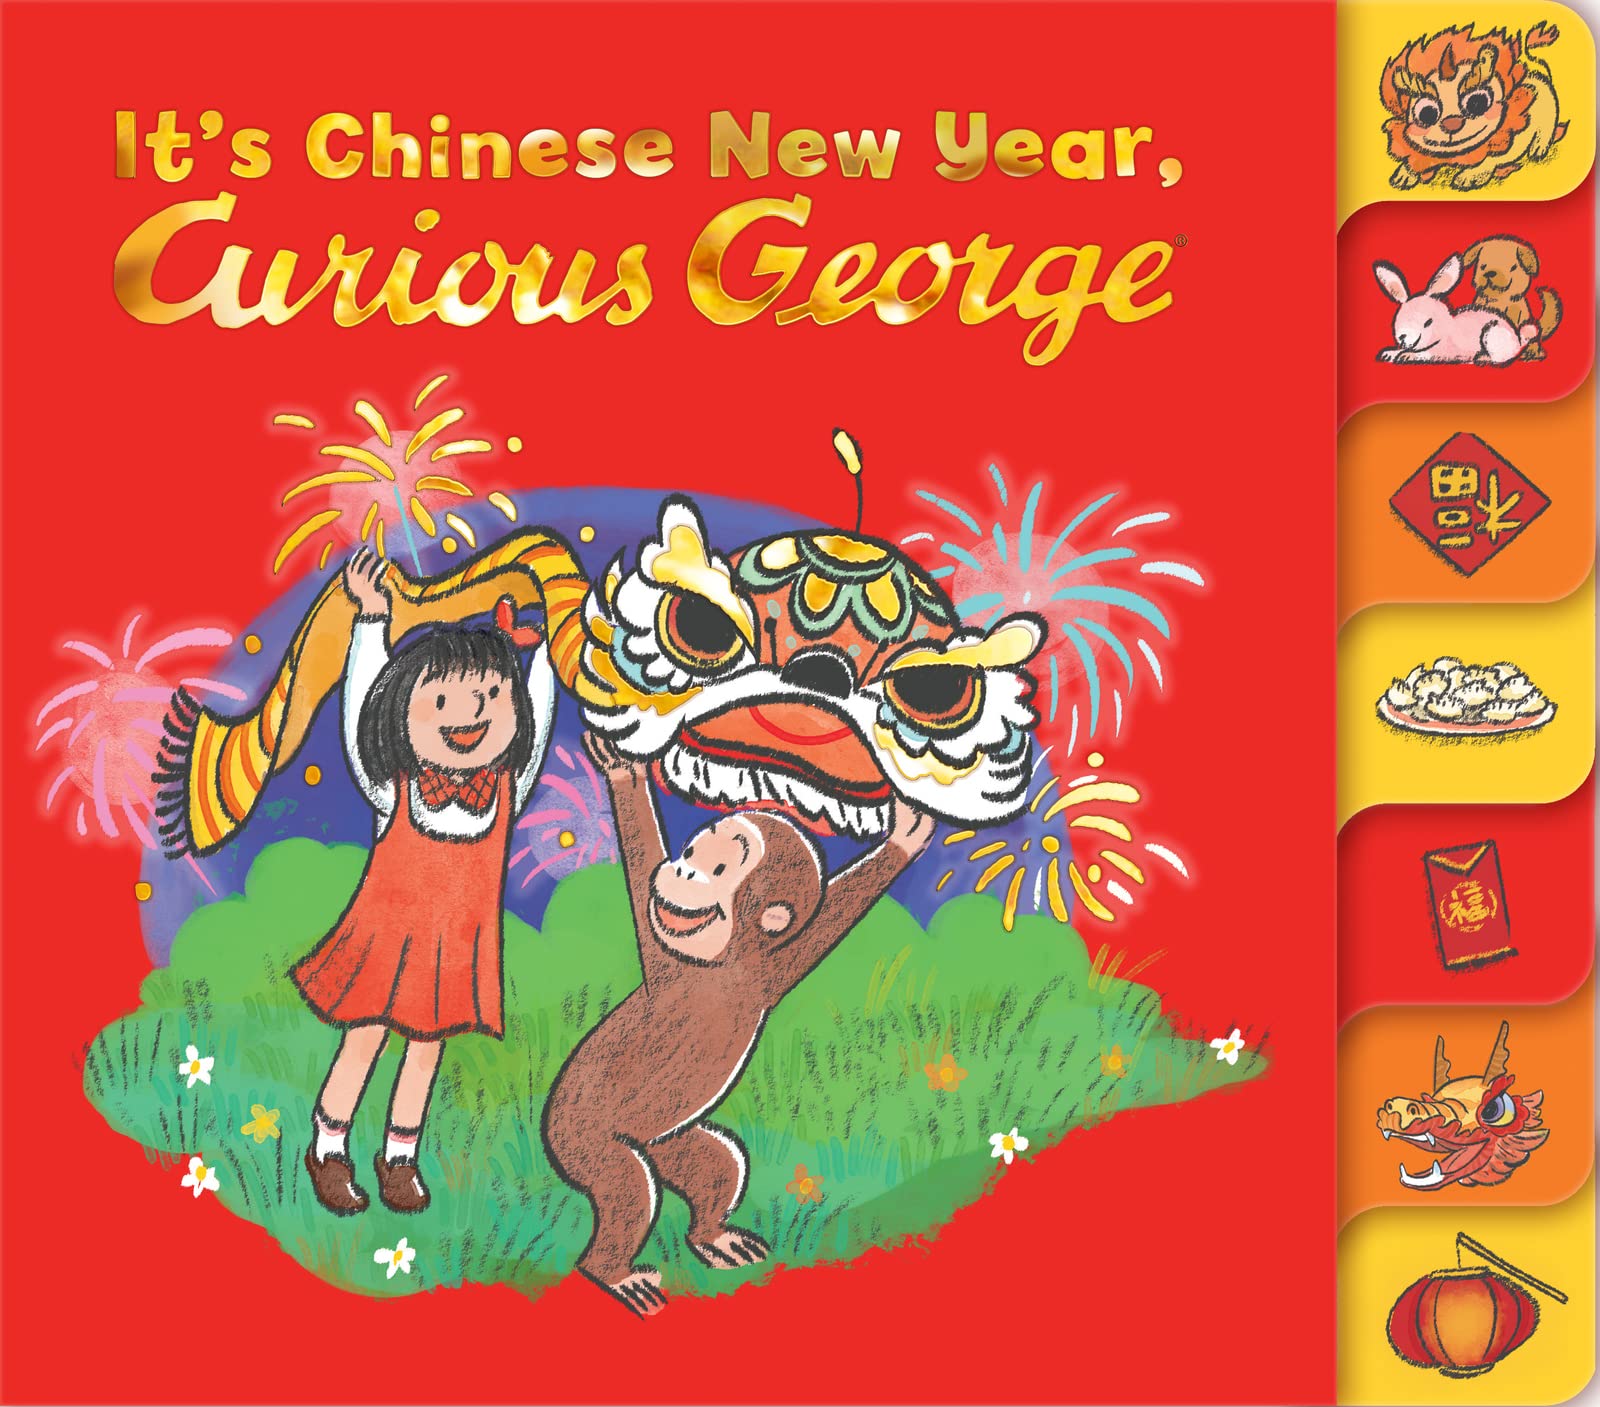 It’s Chinese New Year, Curious George